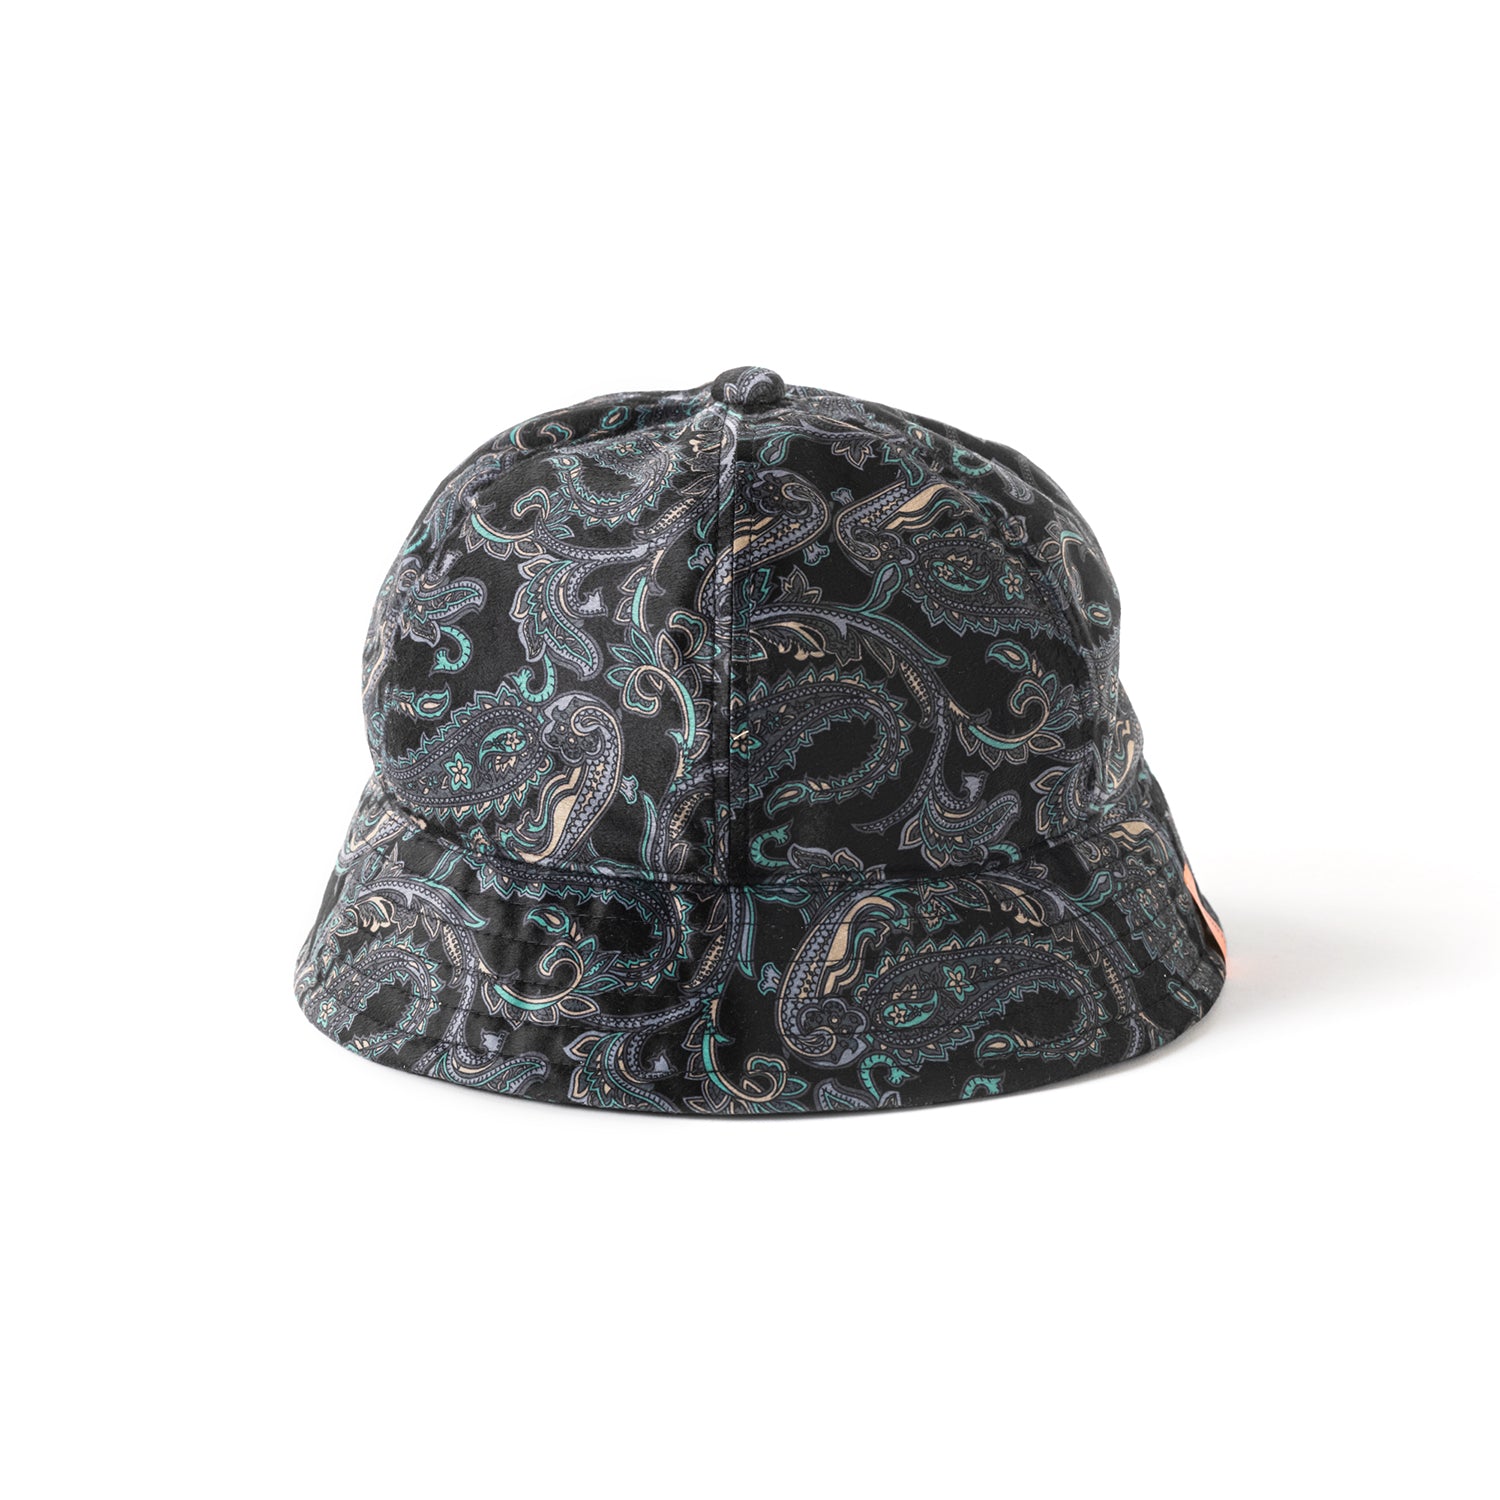 PAISLEY VELOUR HAT – Why are you here?